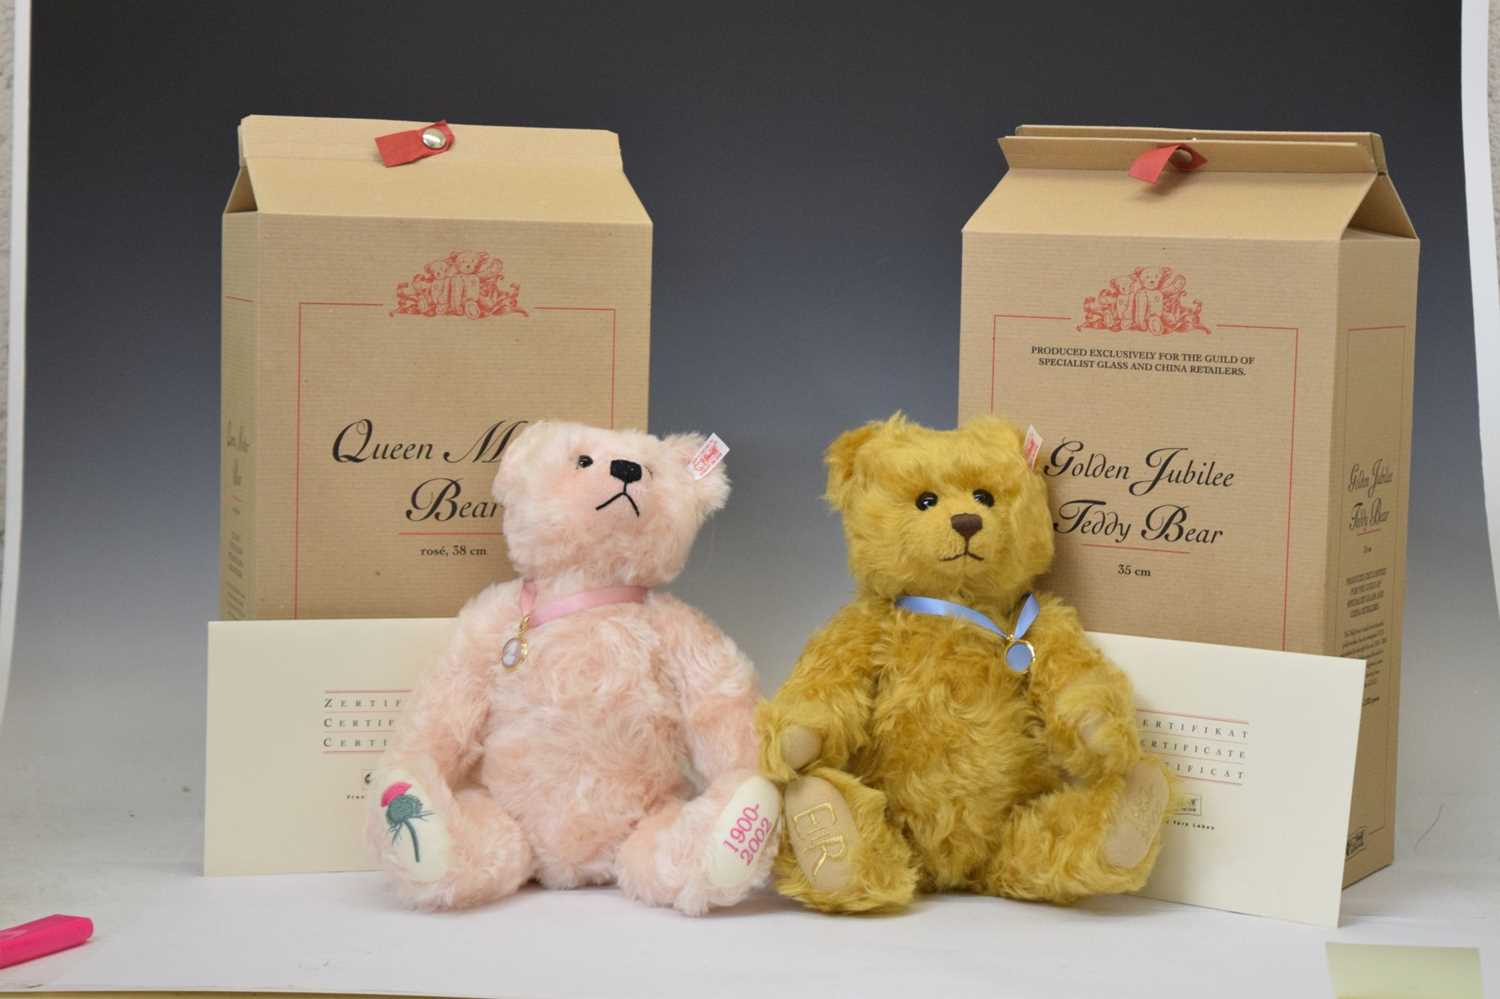 Steiff - Two limited edition teddy bears - 'Golden Jubilee' and 'The Queen Mother' - Image 8 of 8